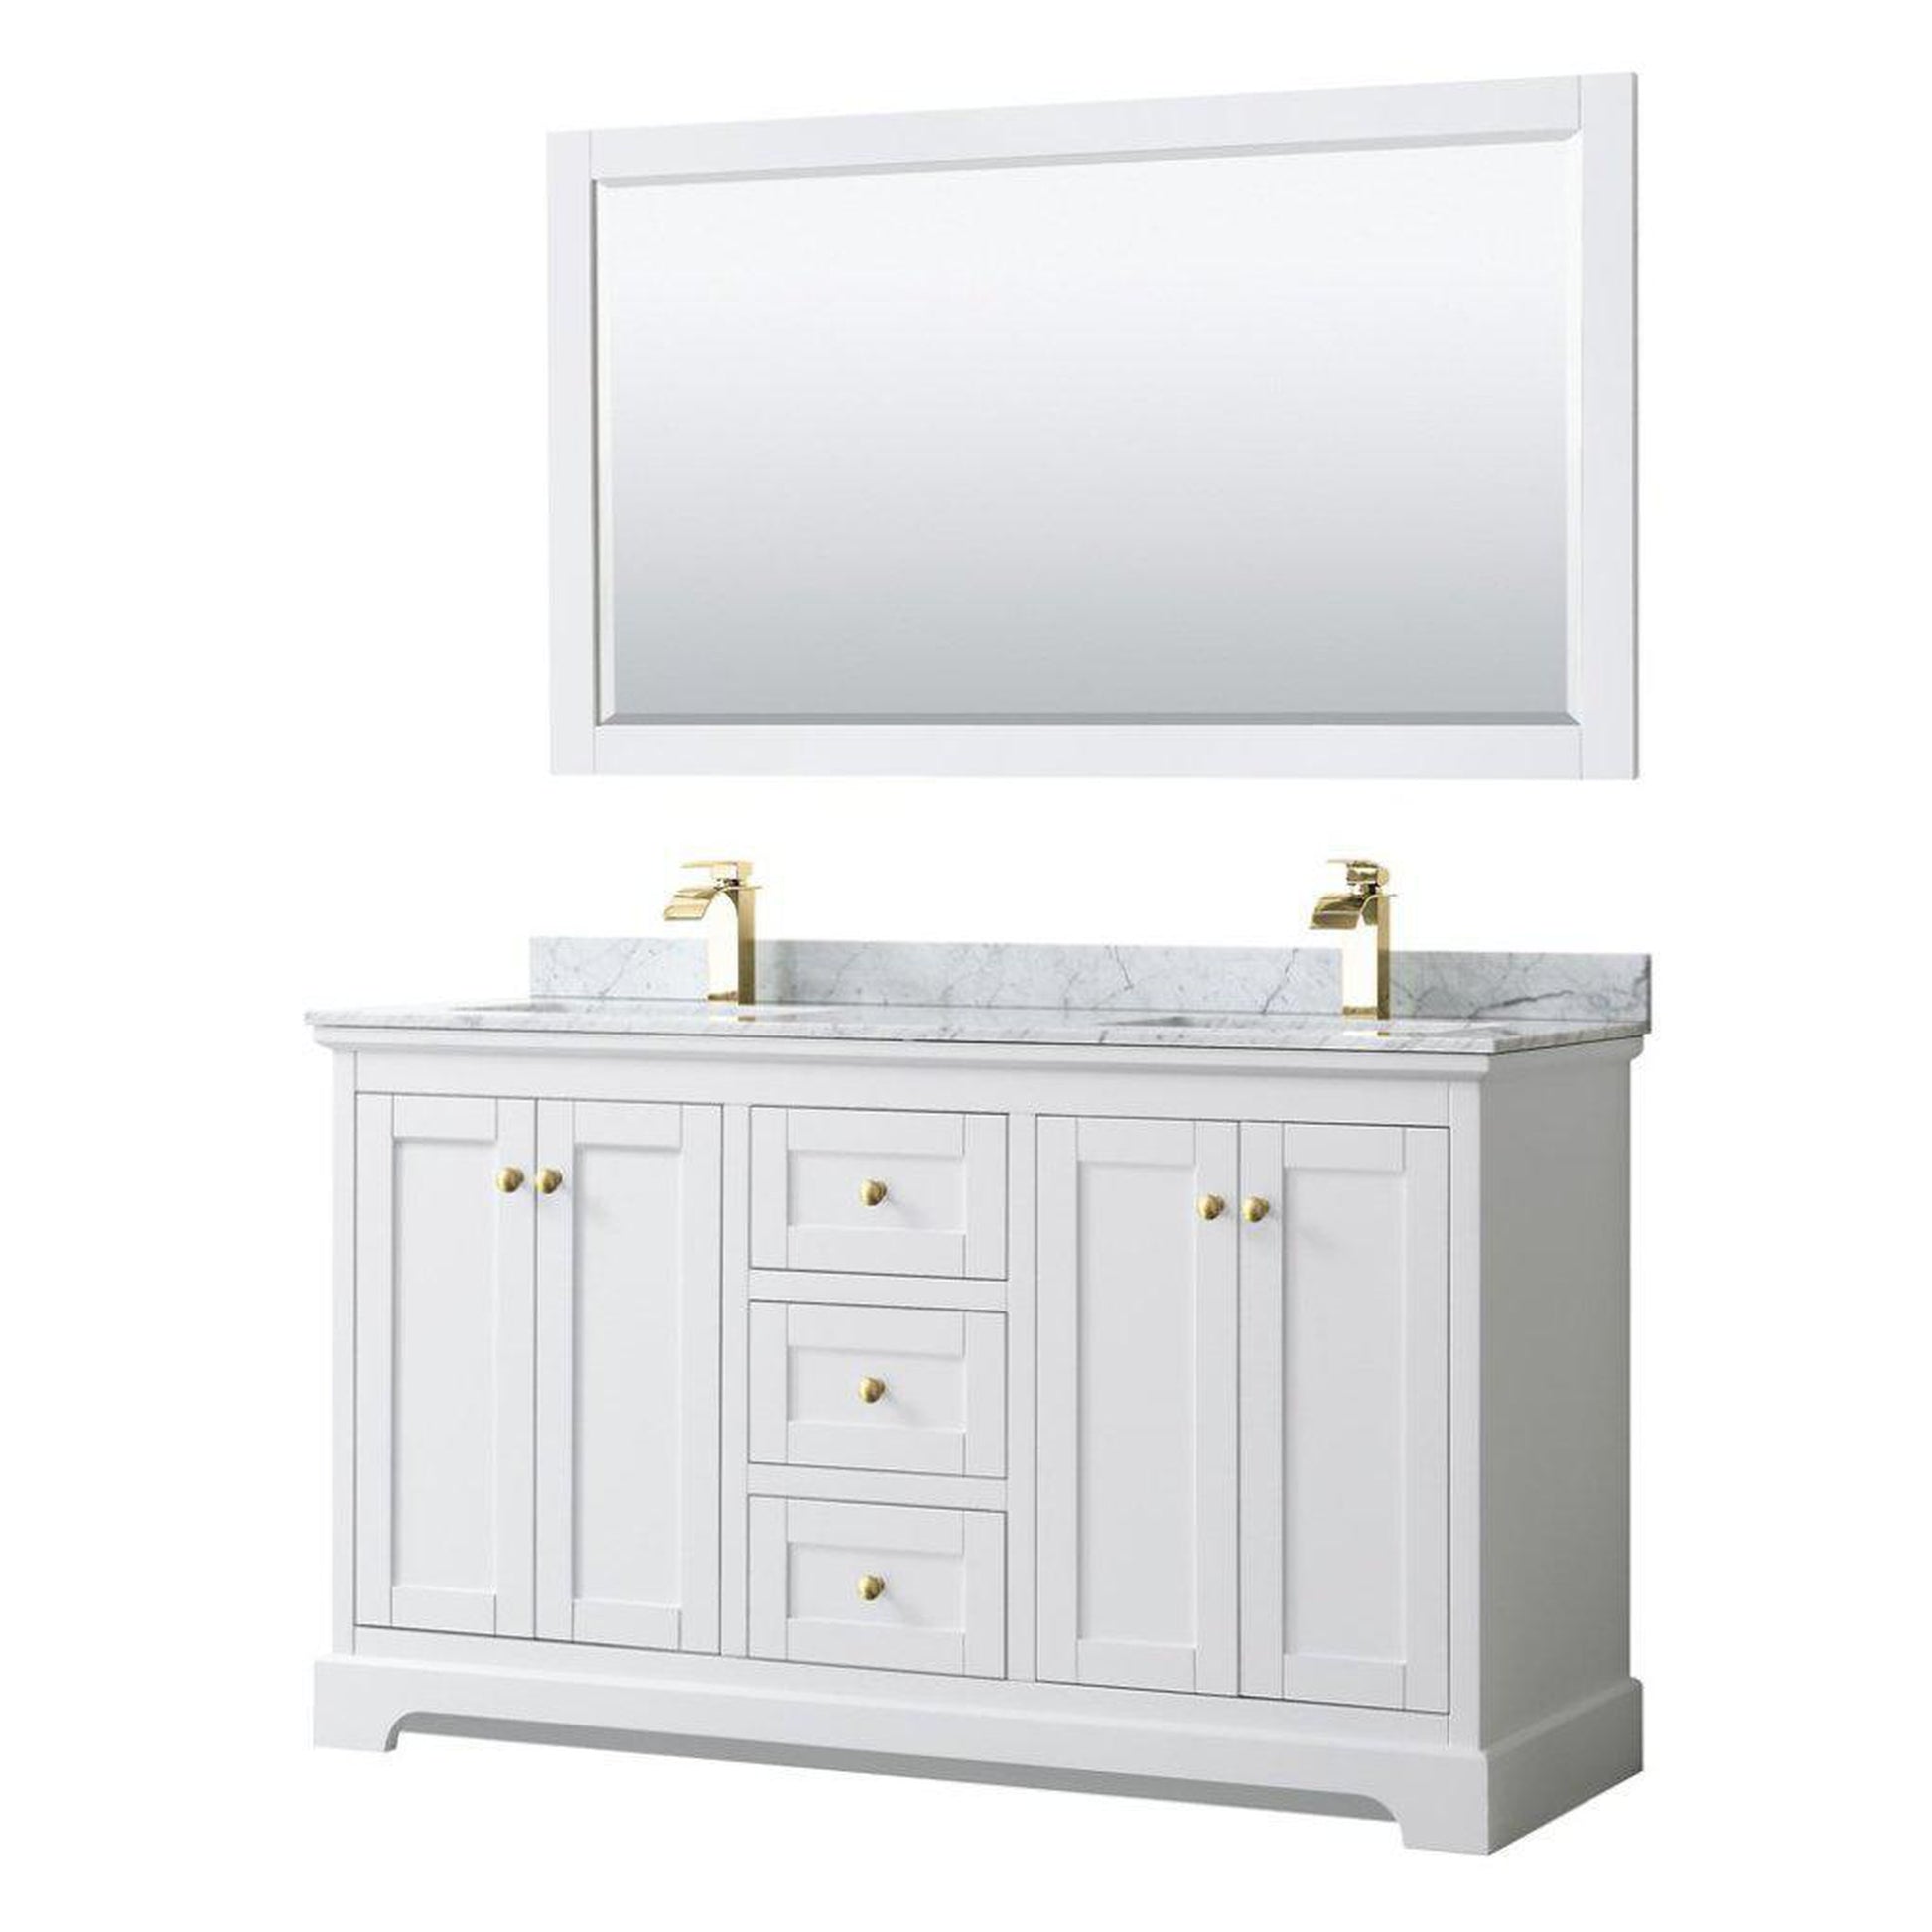 Wyndham Collection Avery 60" White Double Bathroom Vanity Set, White Carrara Marble Countertop With 1-Hole Faucet, Square Sink, 58" Mirror, Gold Trims